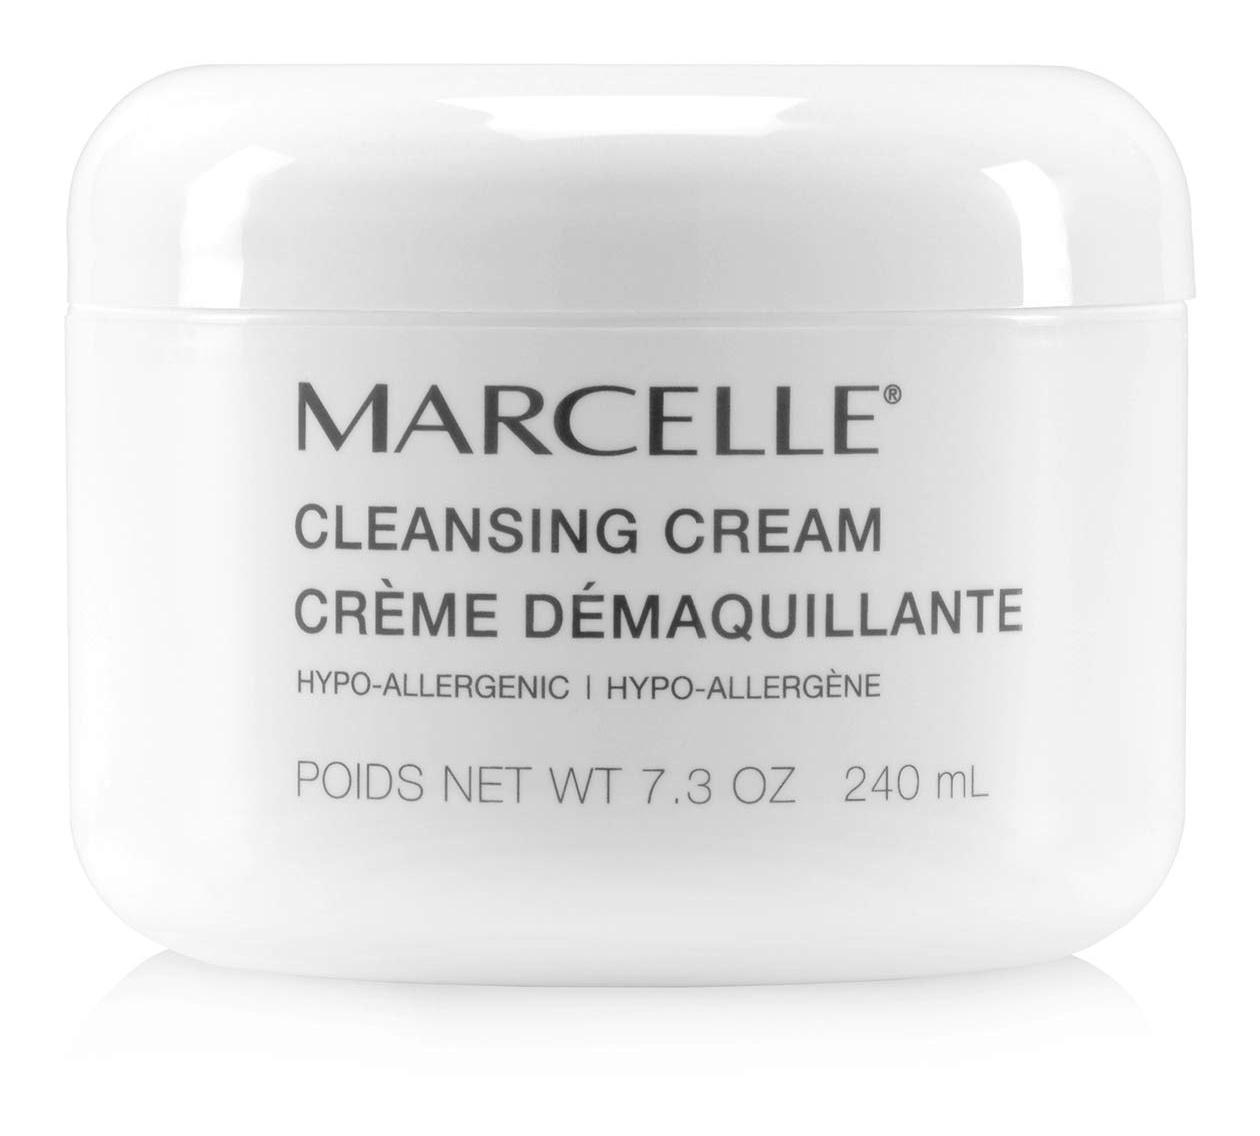 Marcelle Cleansing Cream